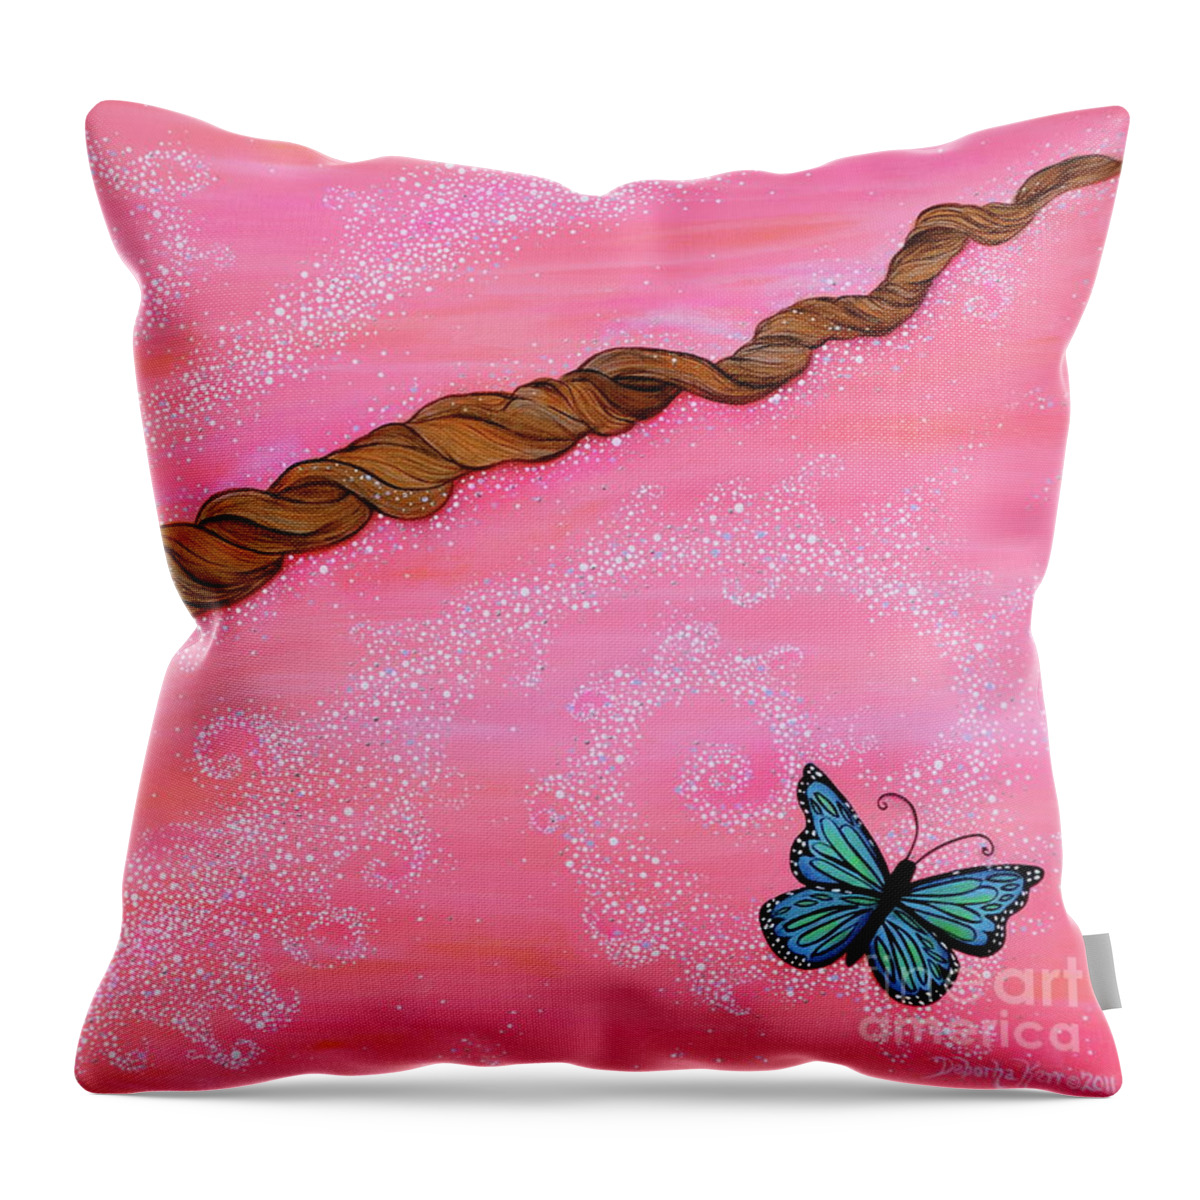 Cypress Paintings Throw Pillow featuring the painting Cypress Wand by Deborha Kerr